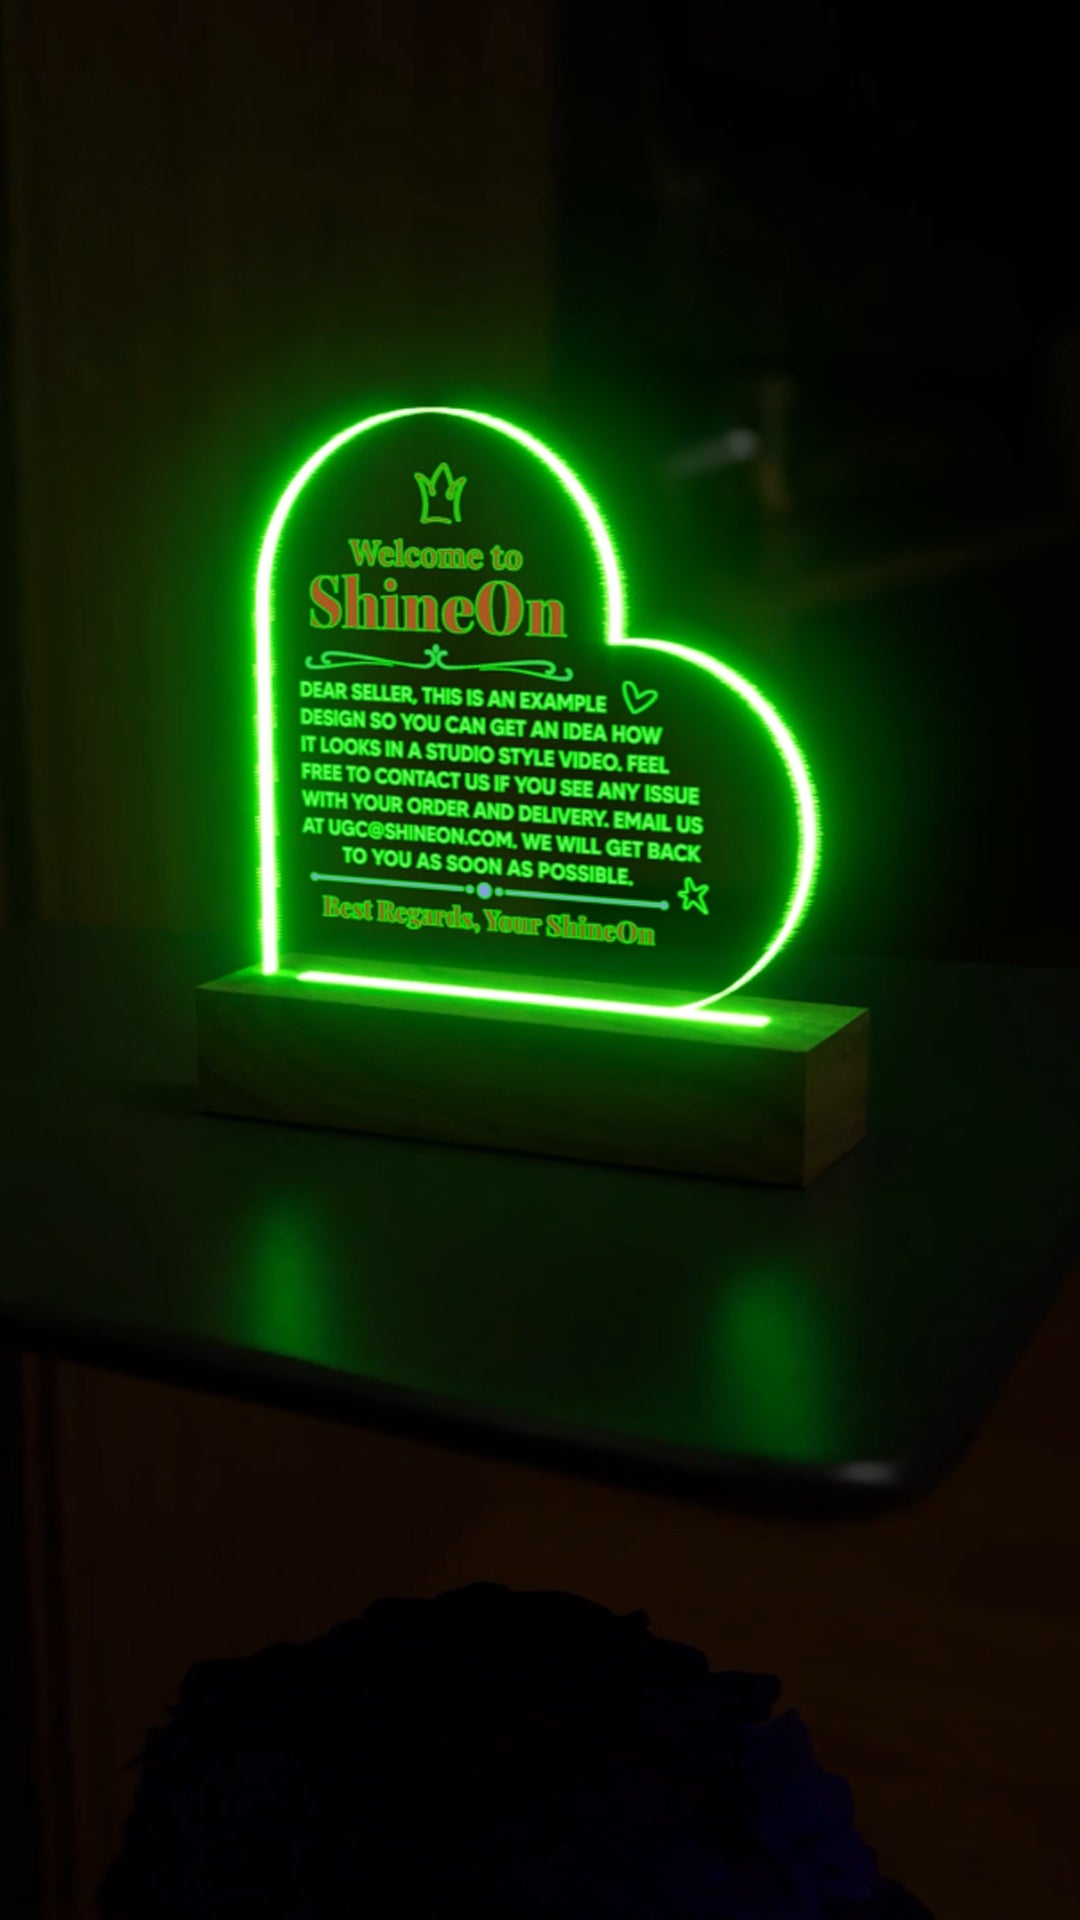 Acrylic Heart Plaque Colored Print Studio Quality With Wooden Base LED RGB - Indoor Scene 2 - 3D